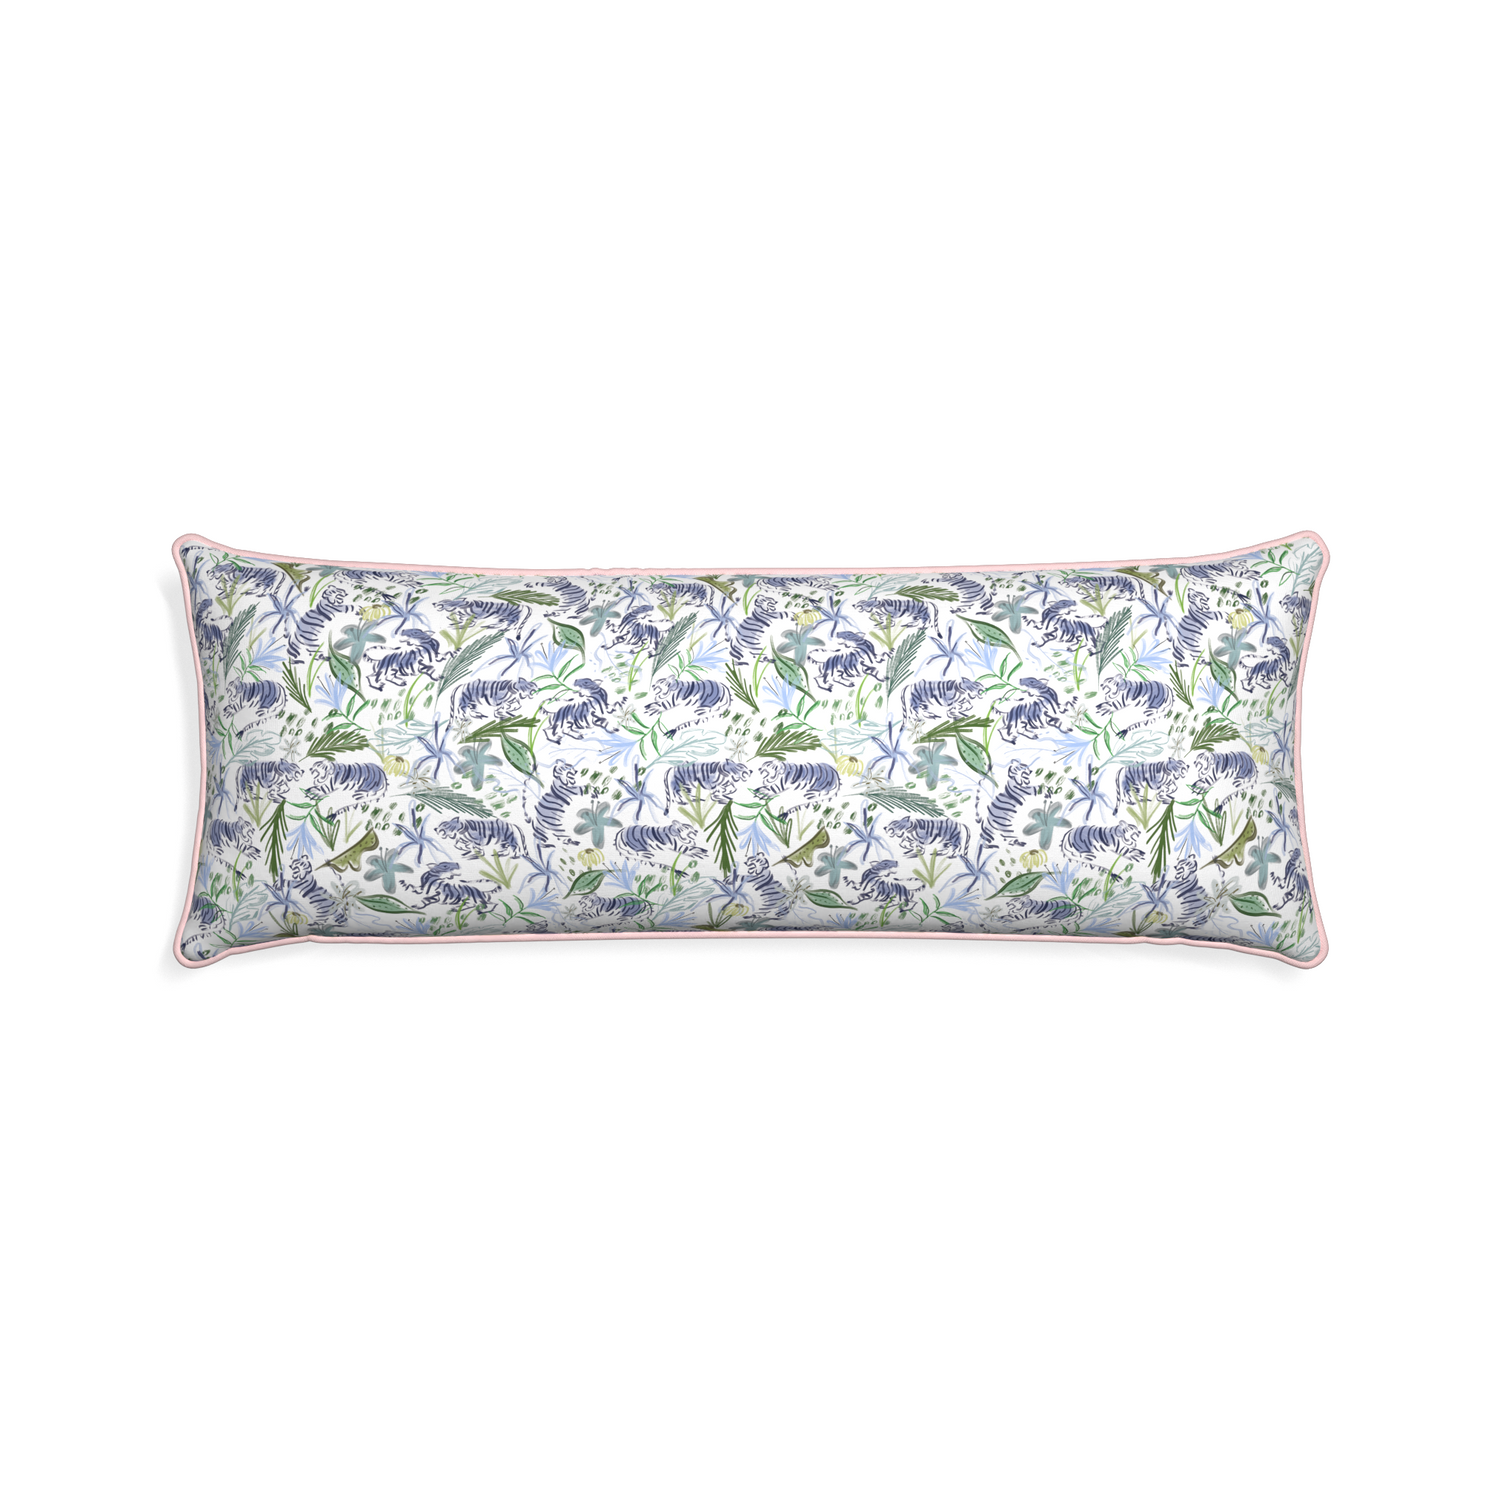 Xl-lumbar frida green custom pillow with petal piping on white background